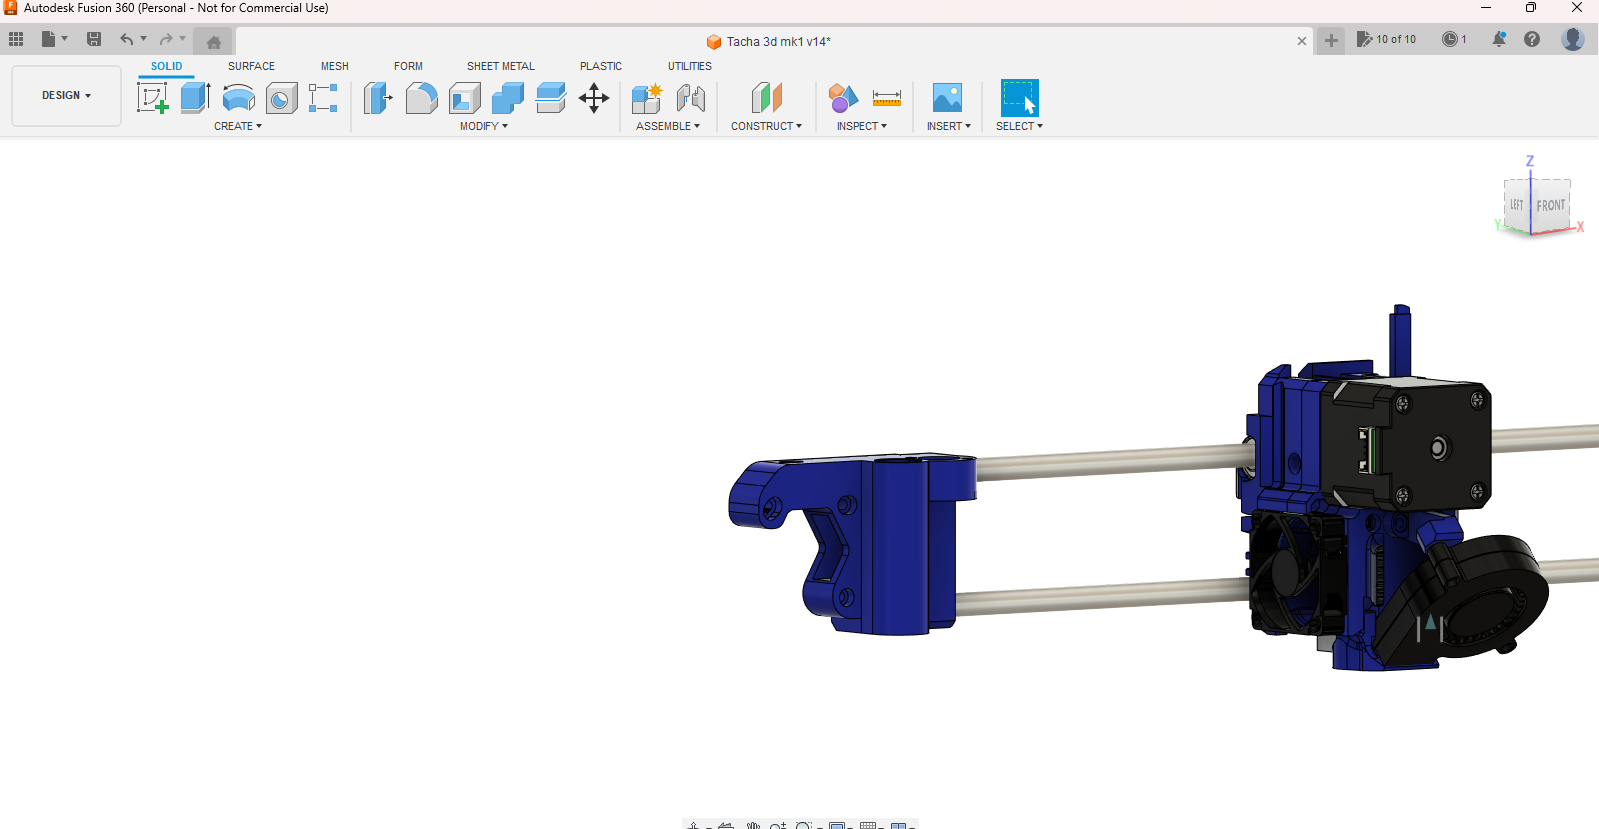 Autodesk Fusion 360 (Personal - Not for Commercial Use) 6_30_2023 9_05_10 PM.png